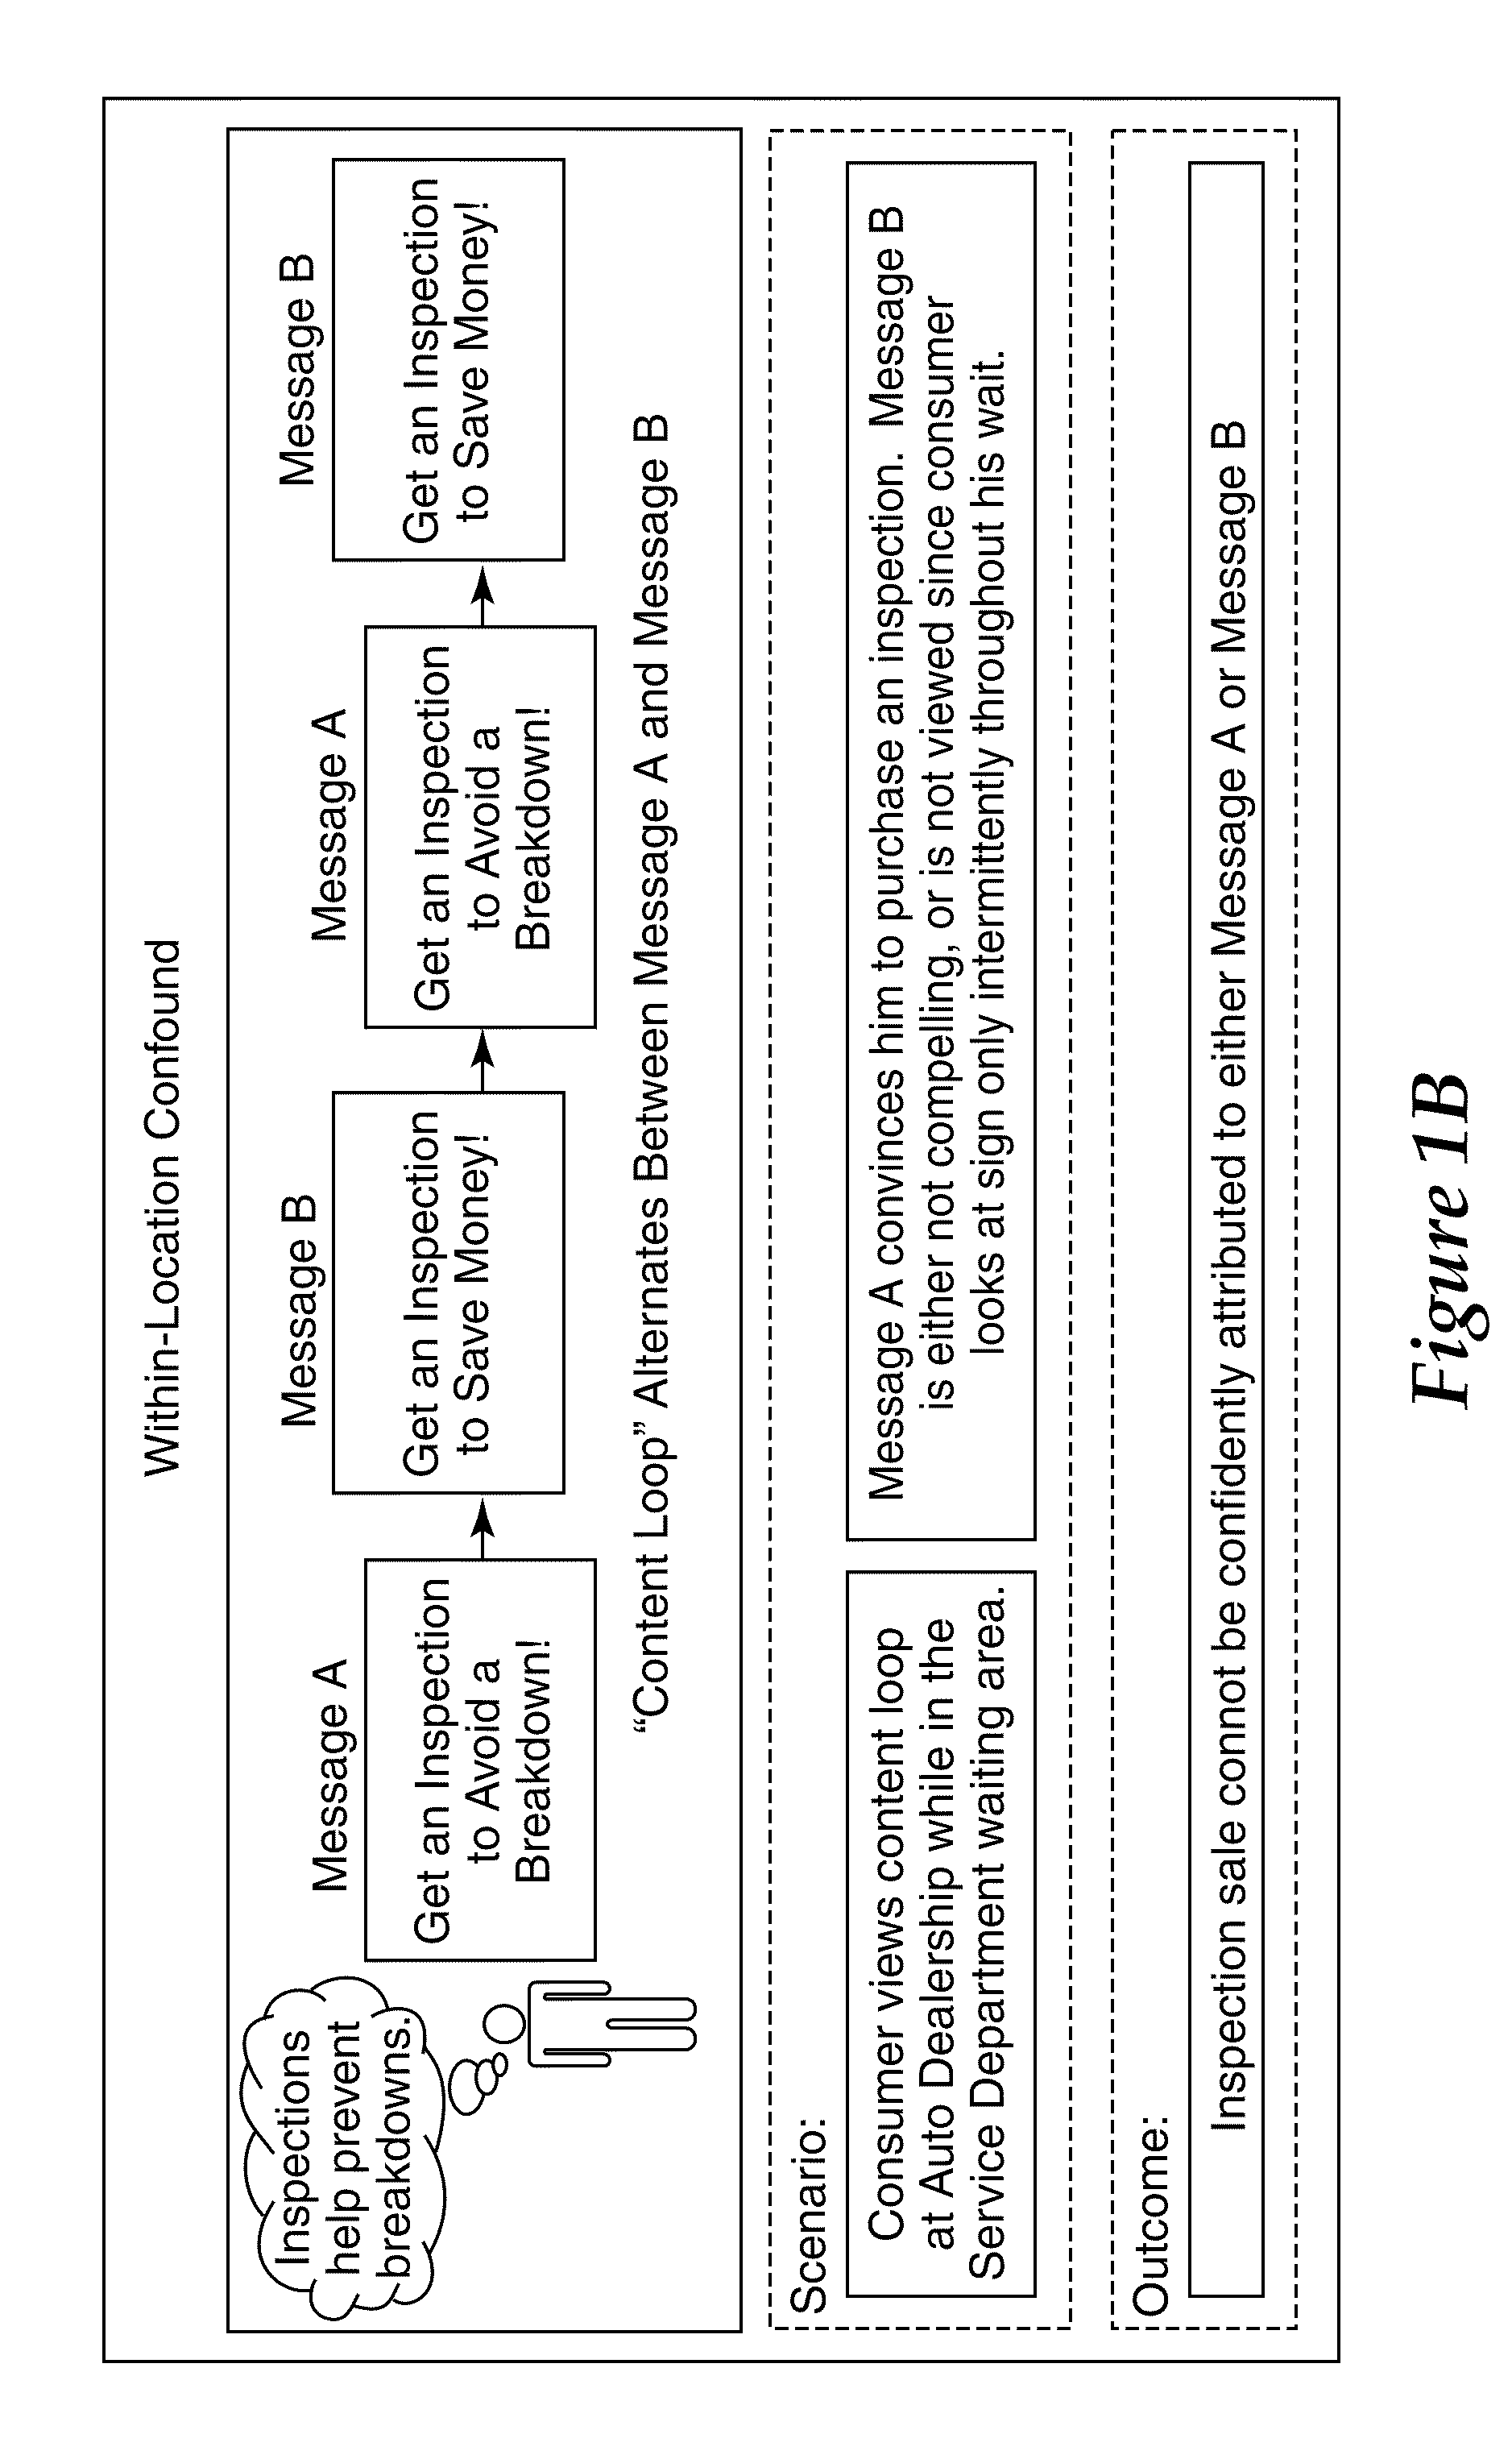 System and method for assessing effectiveness of communication content